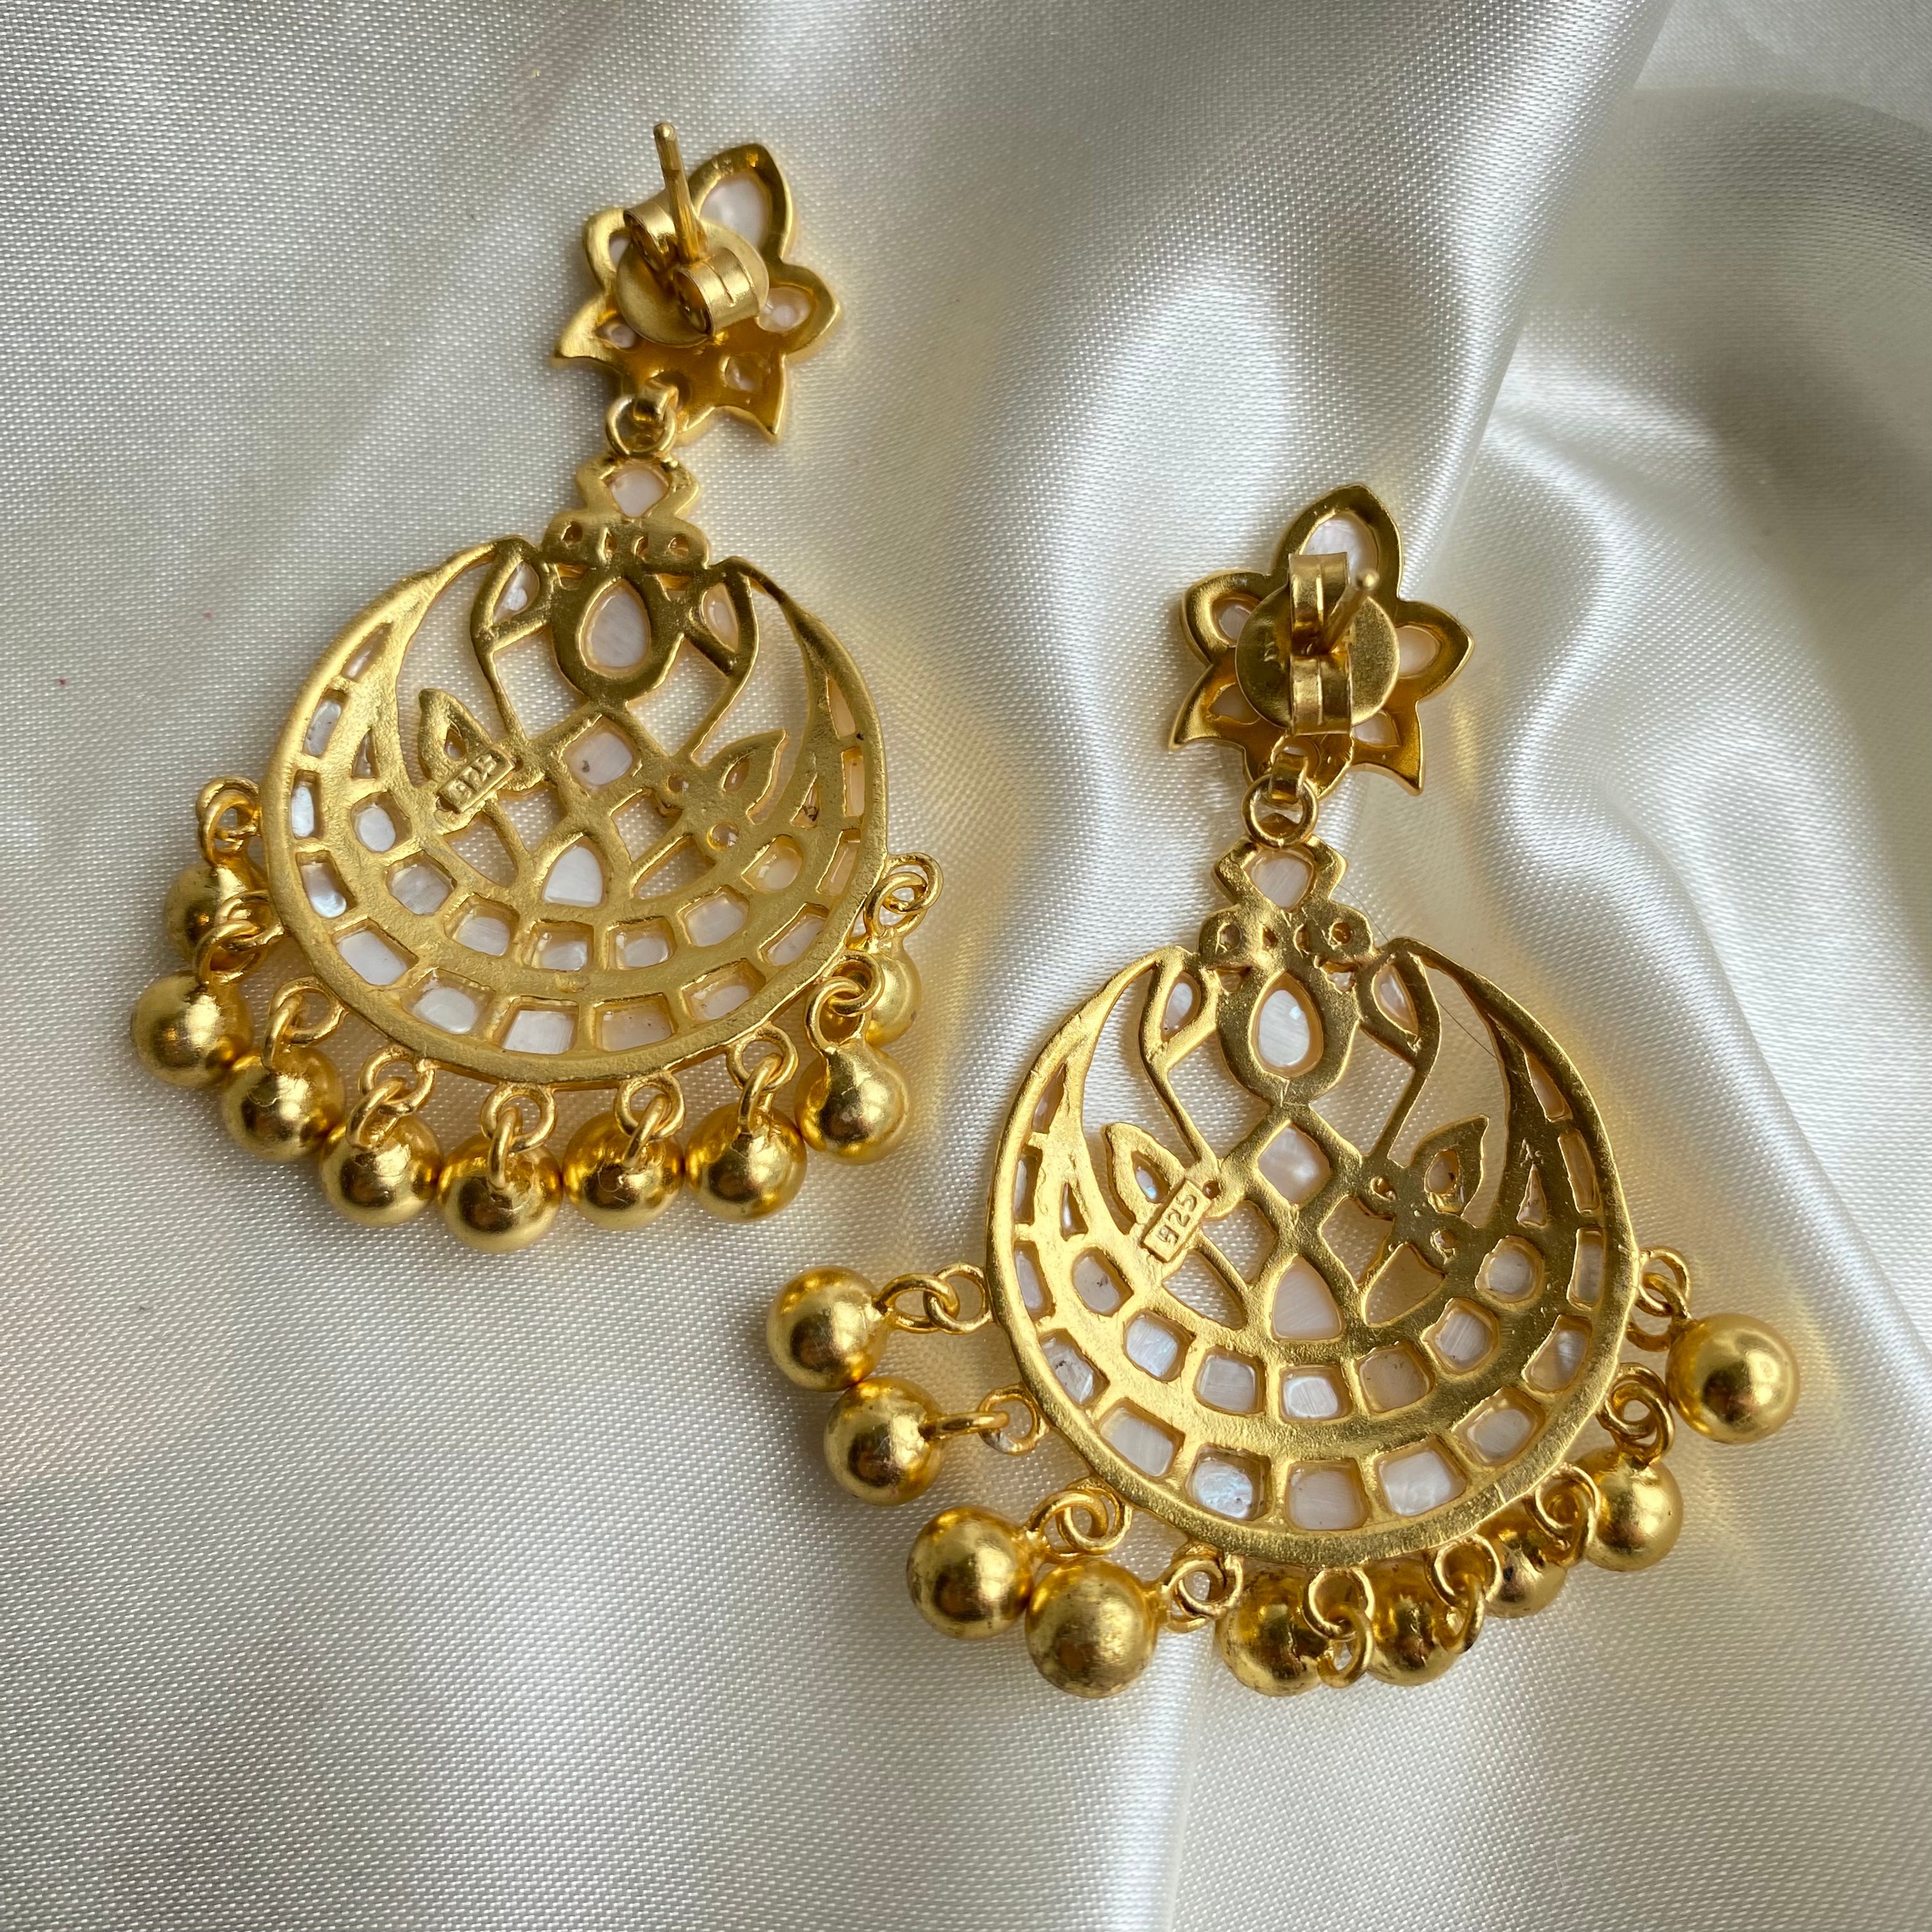 Jasmine Bali Earrings - Mother of Pearl with Gold drops